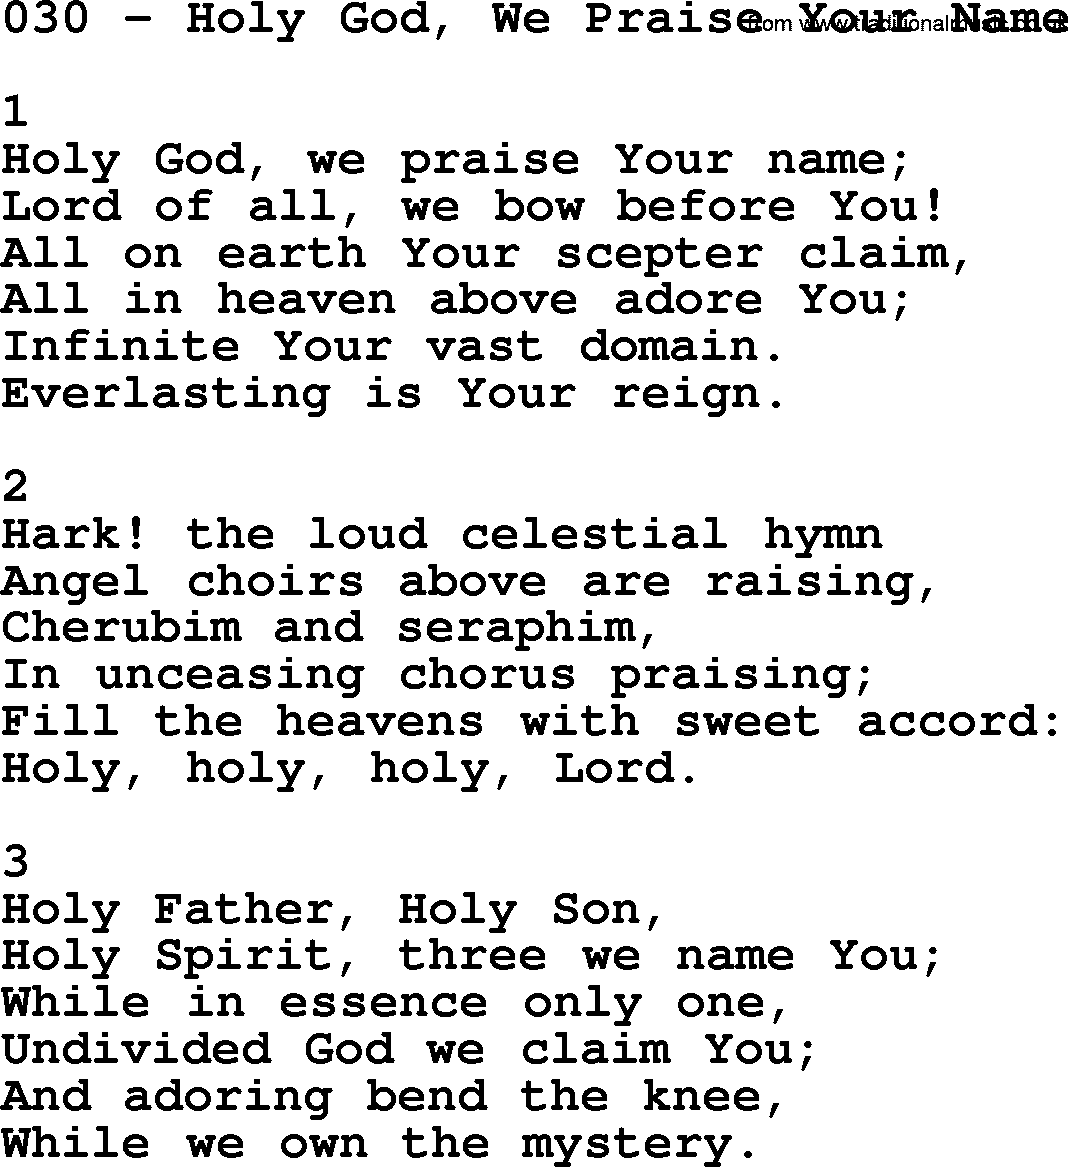 Complete Adventis Hymnal, title: 030-Holy God, We Praise Your Name, with lyrics, midi, mp3, powerpoints(PPT) and PDF,